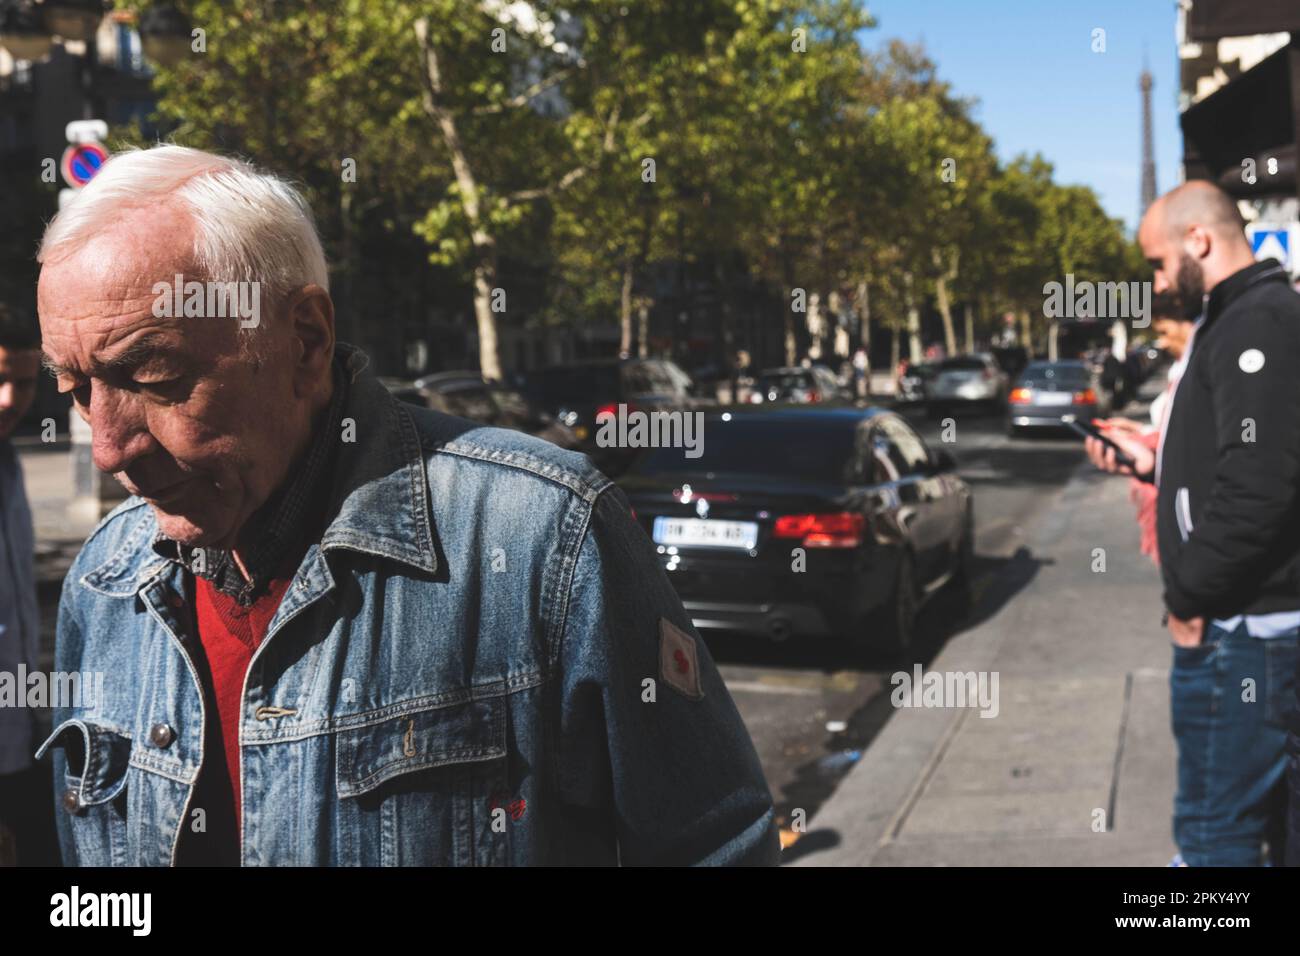 White-Haired Man in Jeans Jacket Captured with Eiffel Tower in the Distance Stock Photo